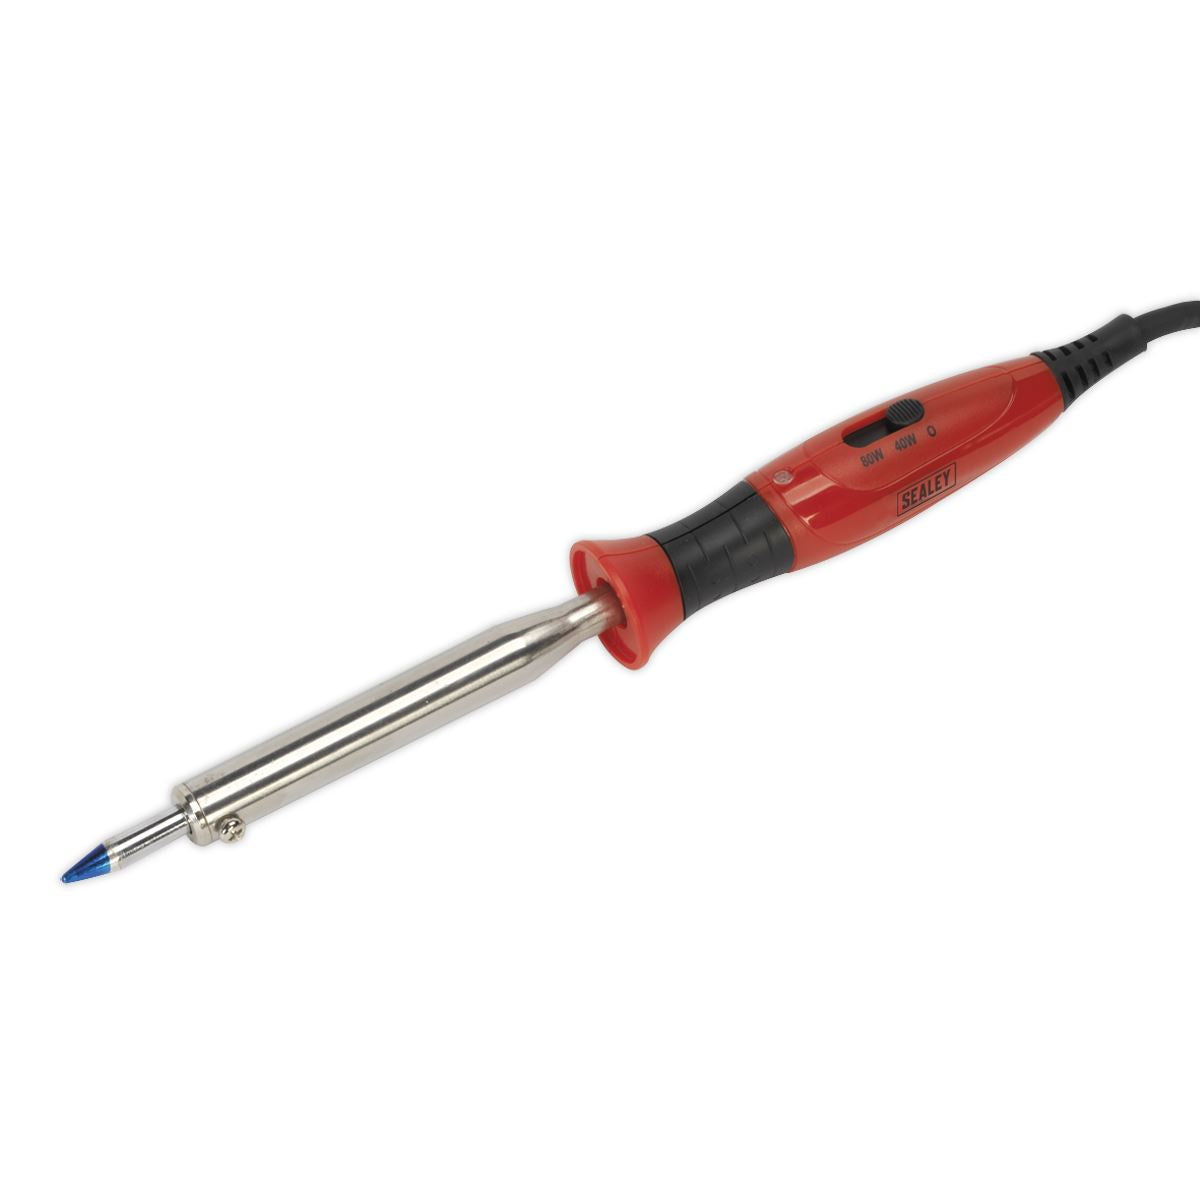 Sealey Premier Professional Soldering Iron with Long-Life Tip Dual Wattage 40/80W/230V